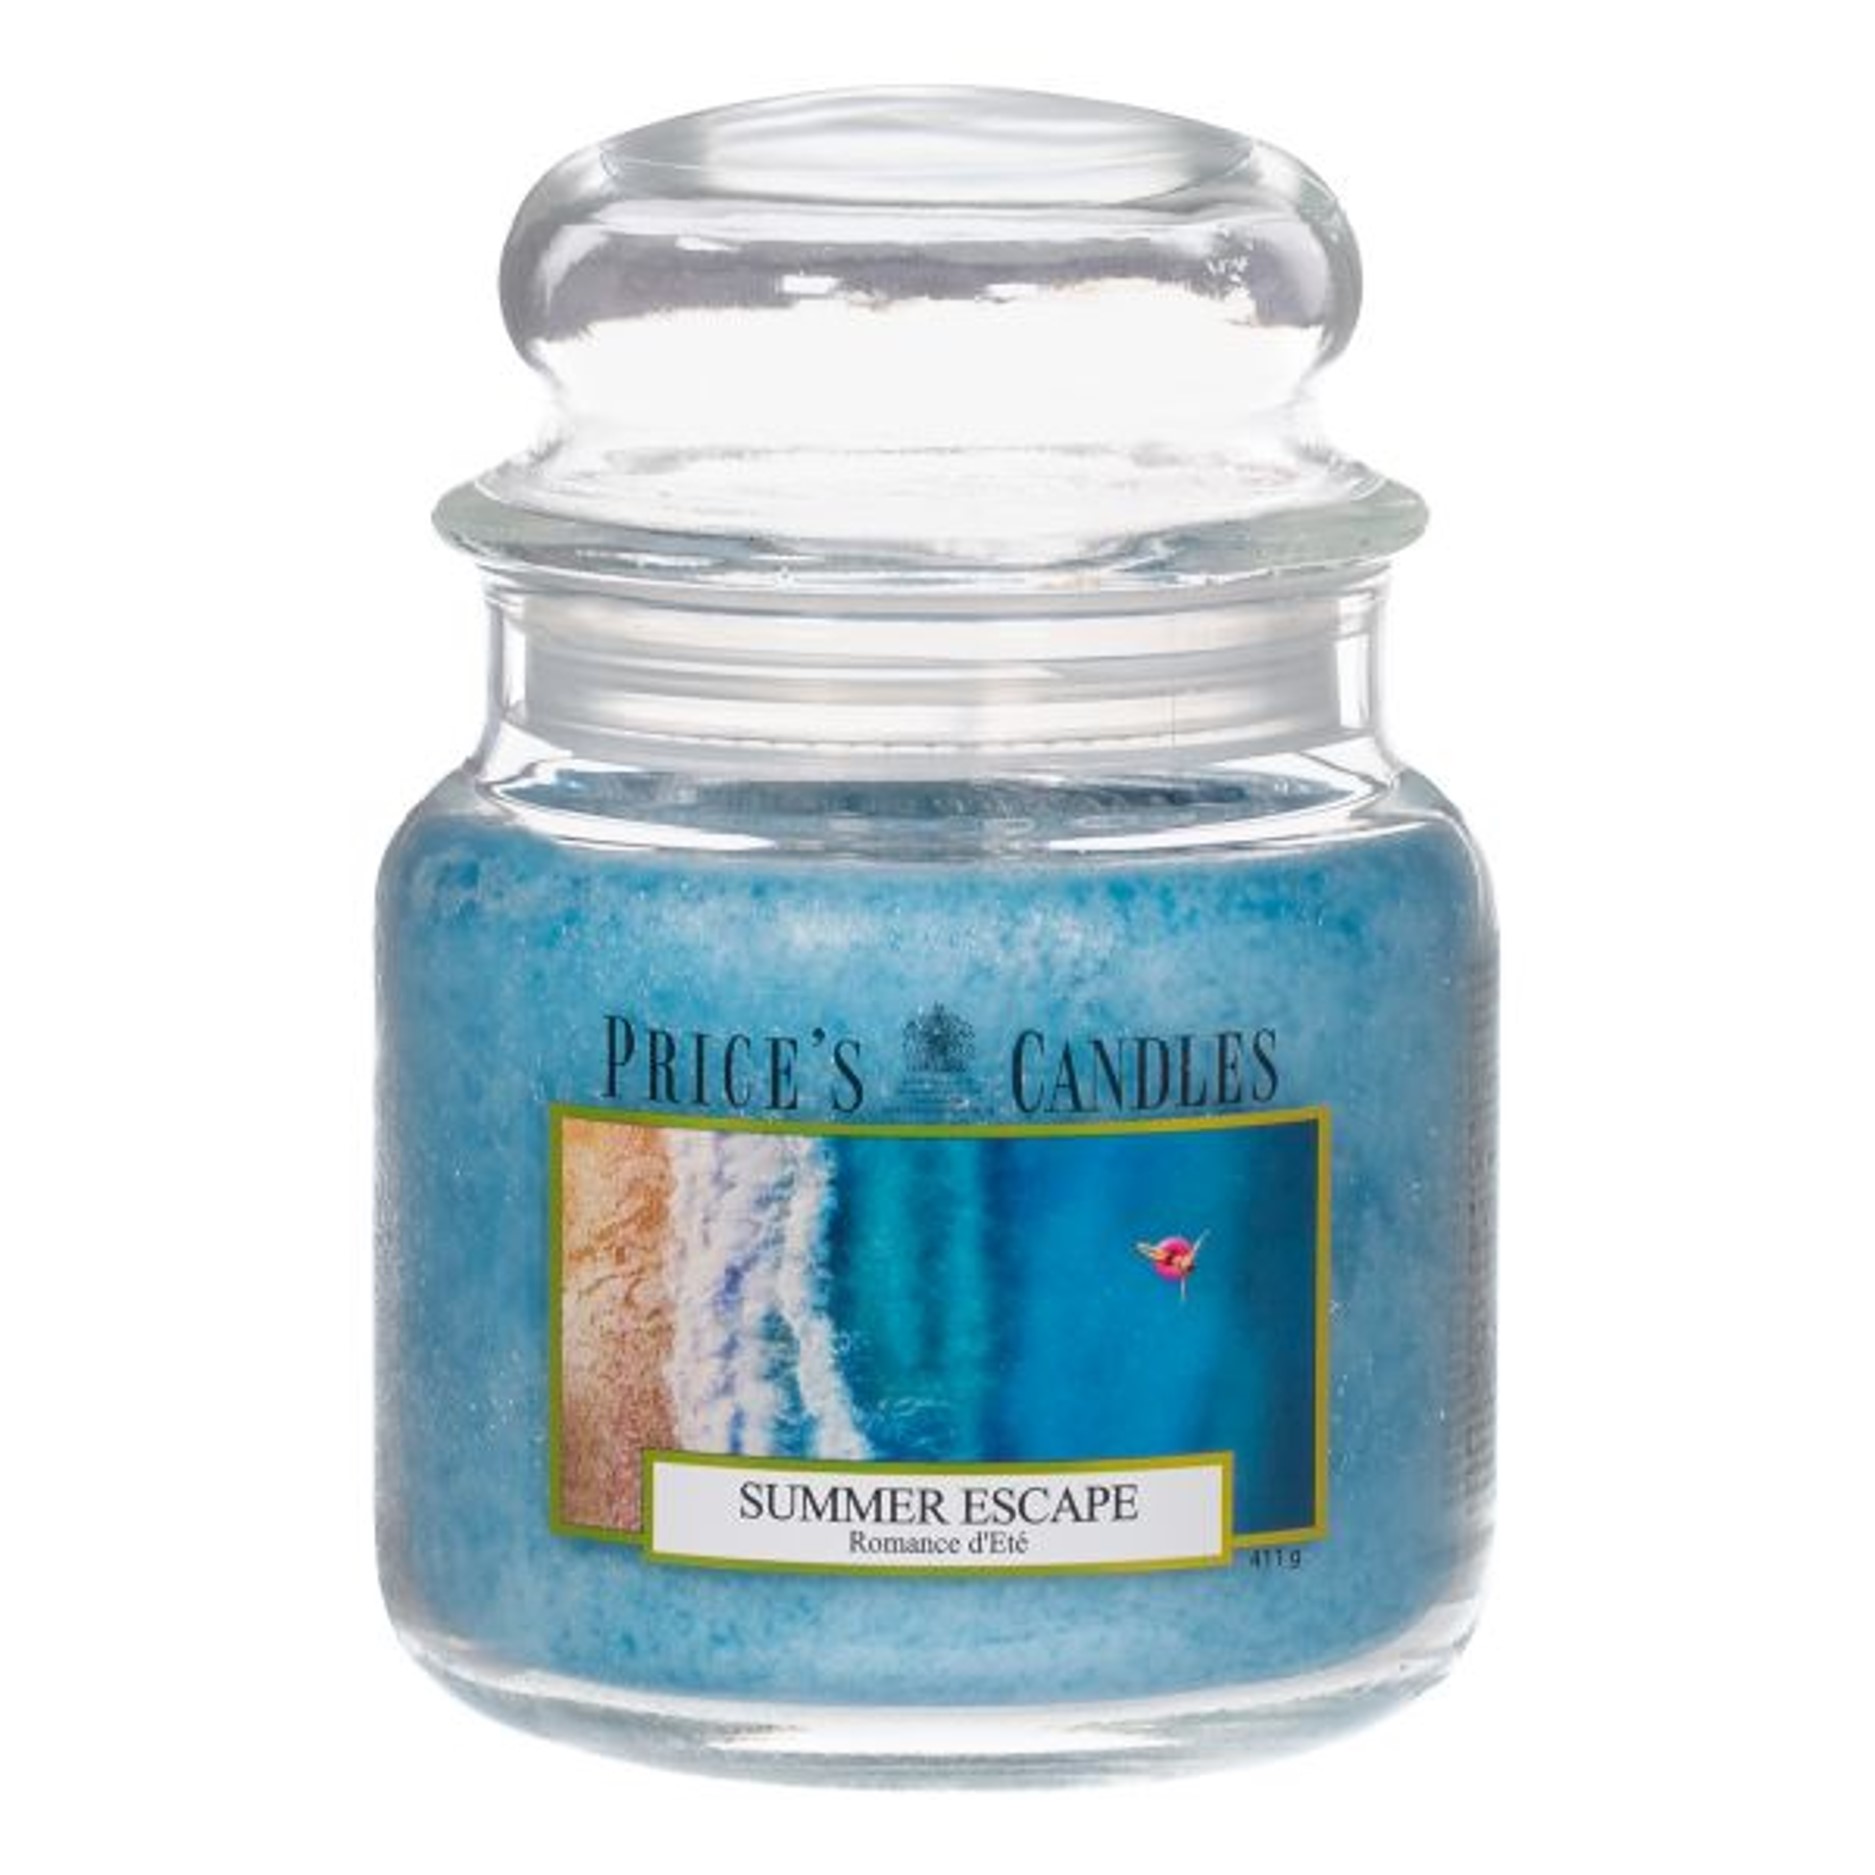 Prices Candle "Summer Escape" 411g  